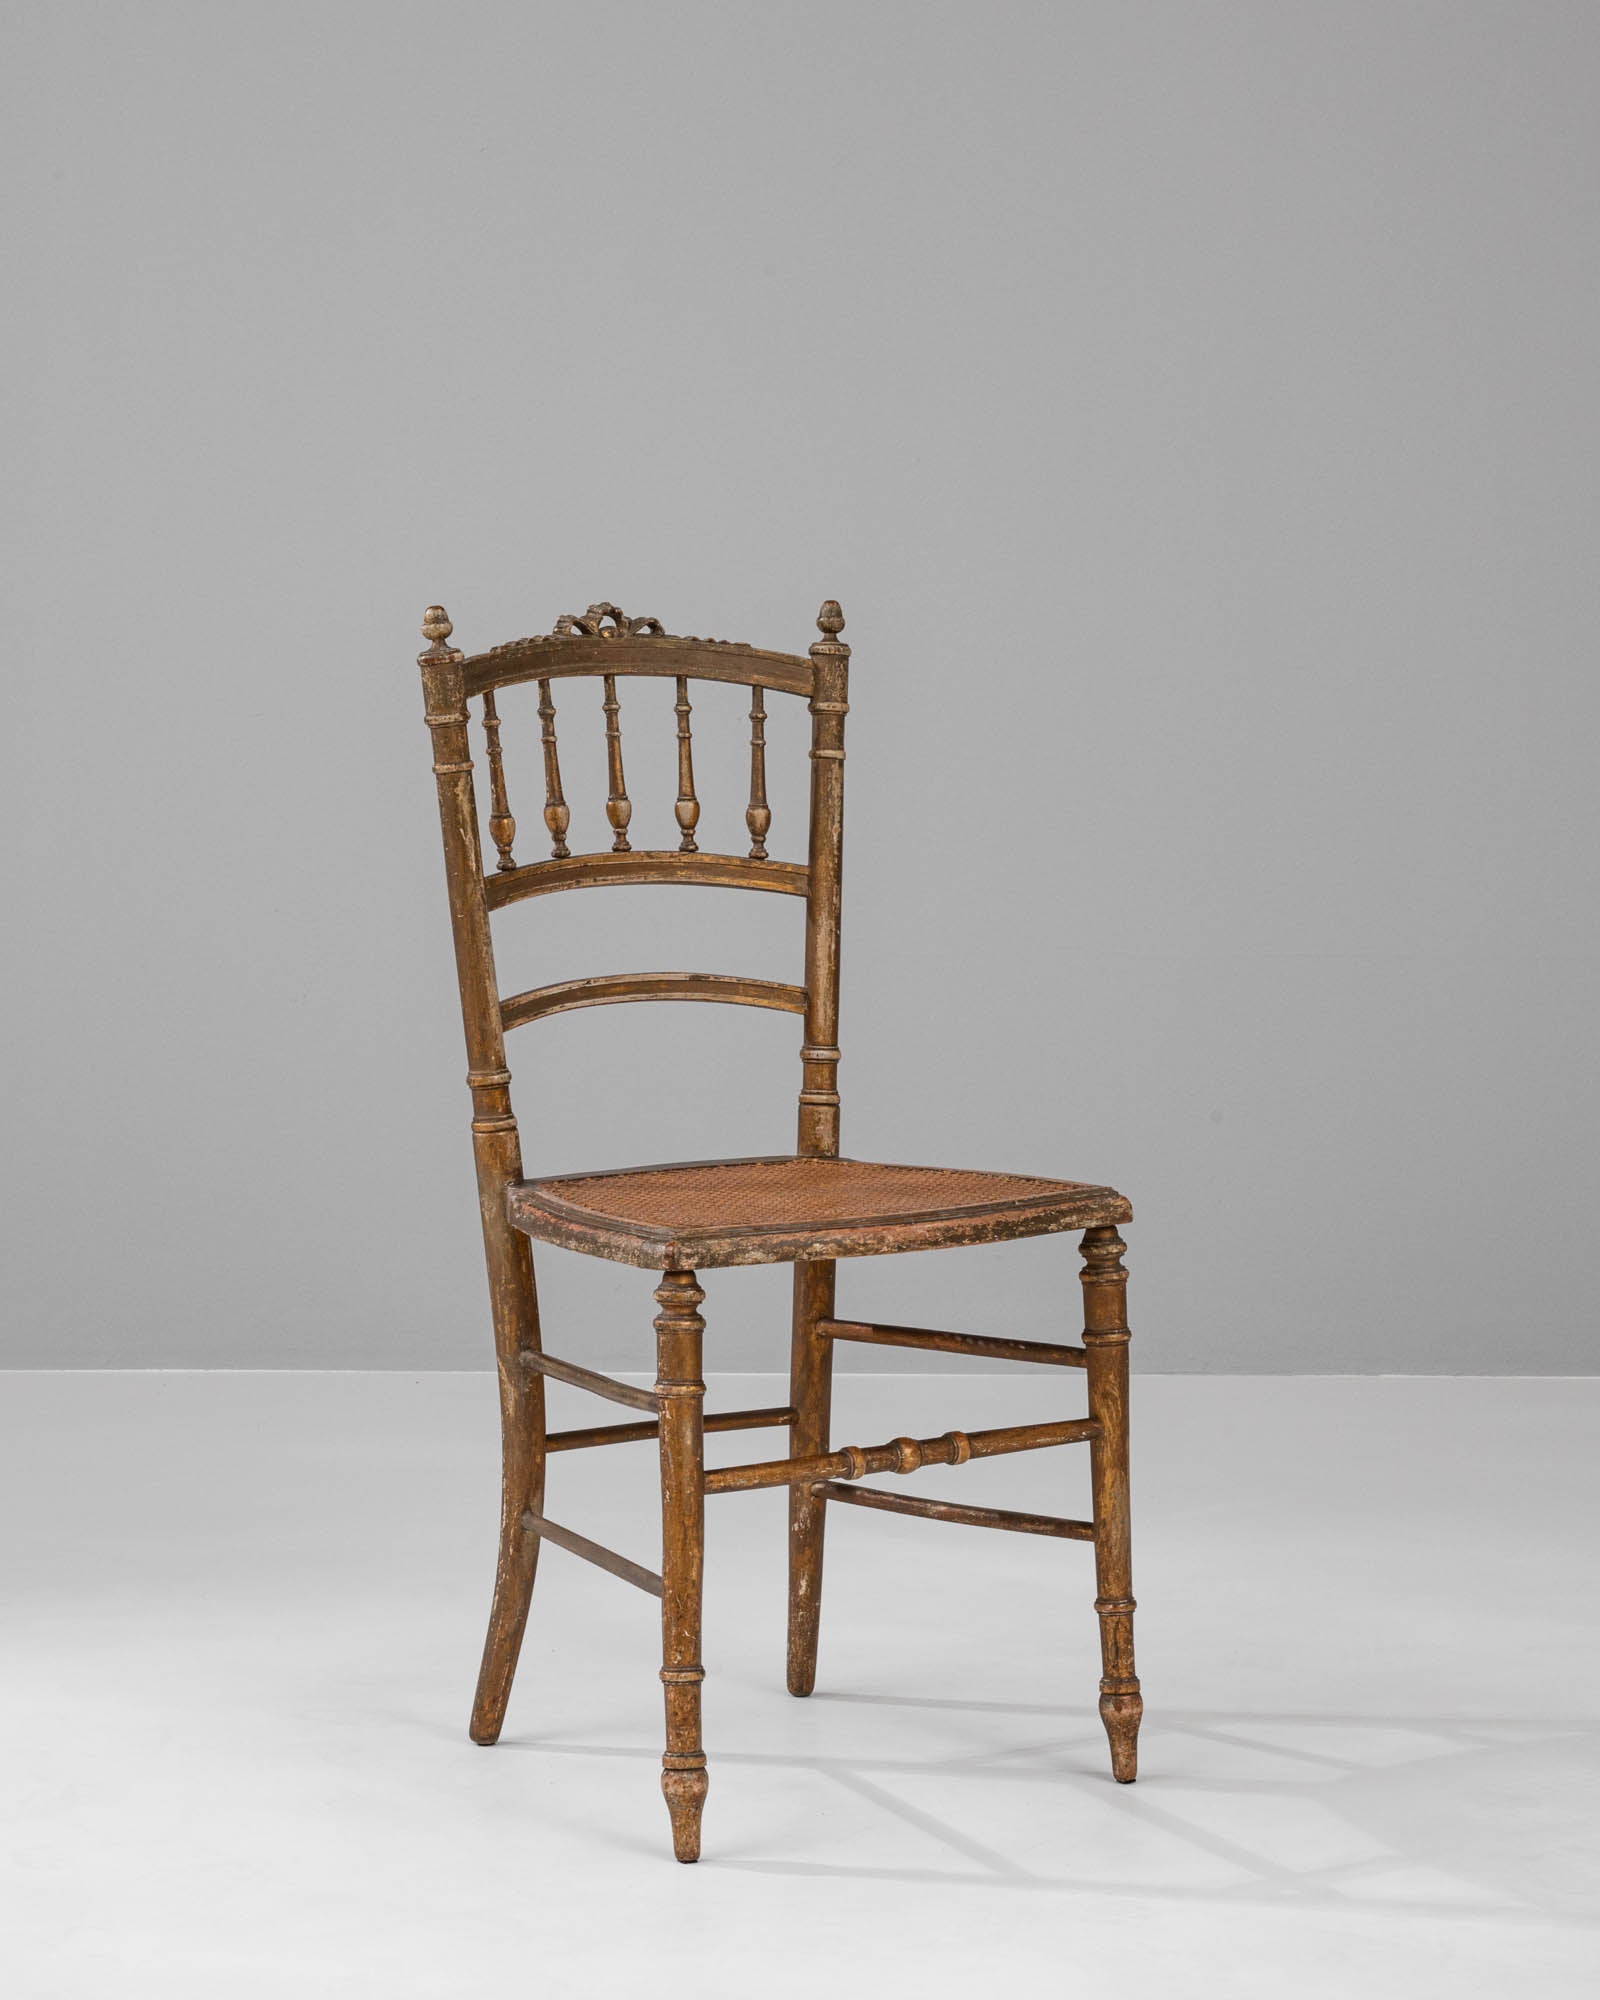 Step into a bygone era of elegance and charm with our authentic 1880s French Wooden Chair. This exquisite piece of history is crafted with meticulous attention to detail, evident in the turned spindle design and the gracefully arched ladder back